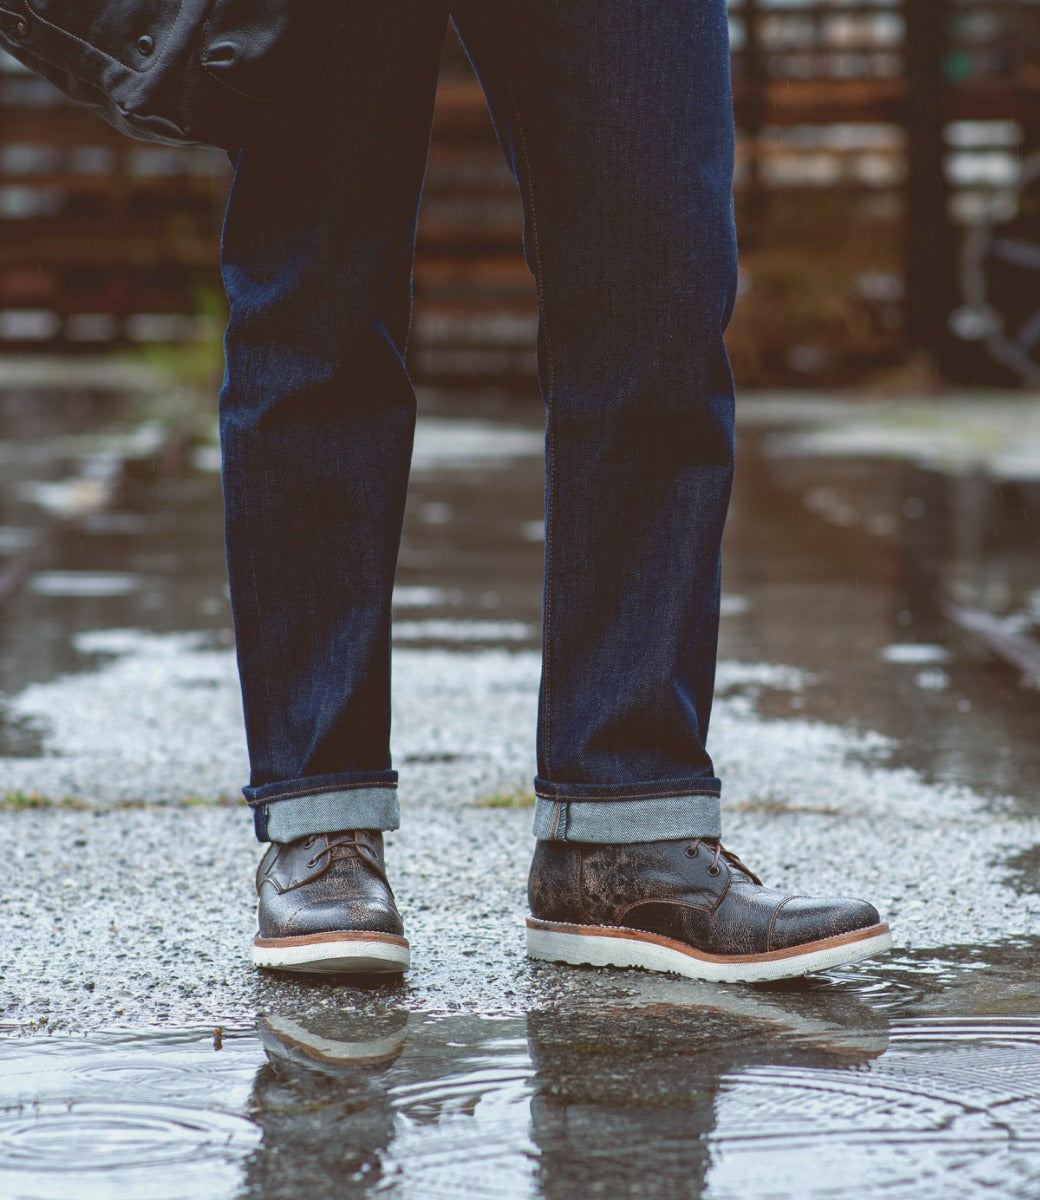 Person standing in a puddle wearing jeans and Bed Stu Protege Light Black Lux Boots with cushioned leather insoles, with wet ground and partial view of a wooden fence in the background.